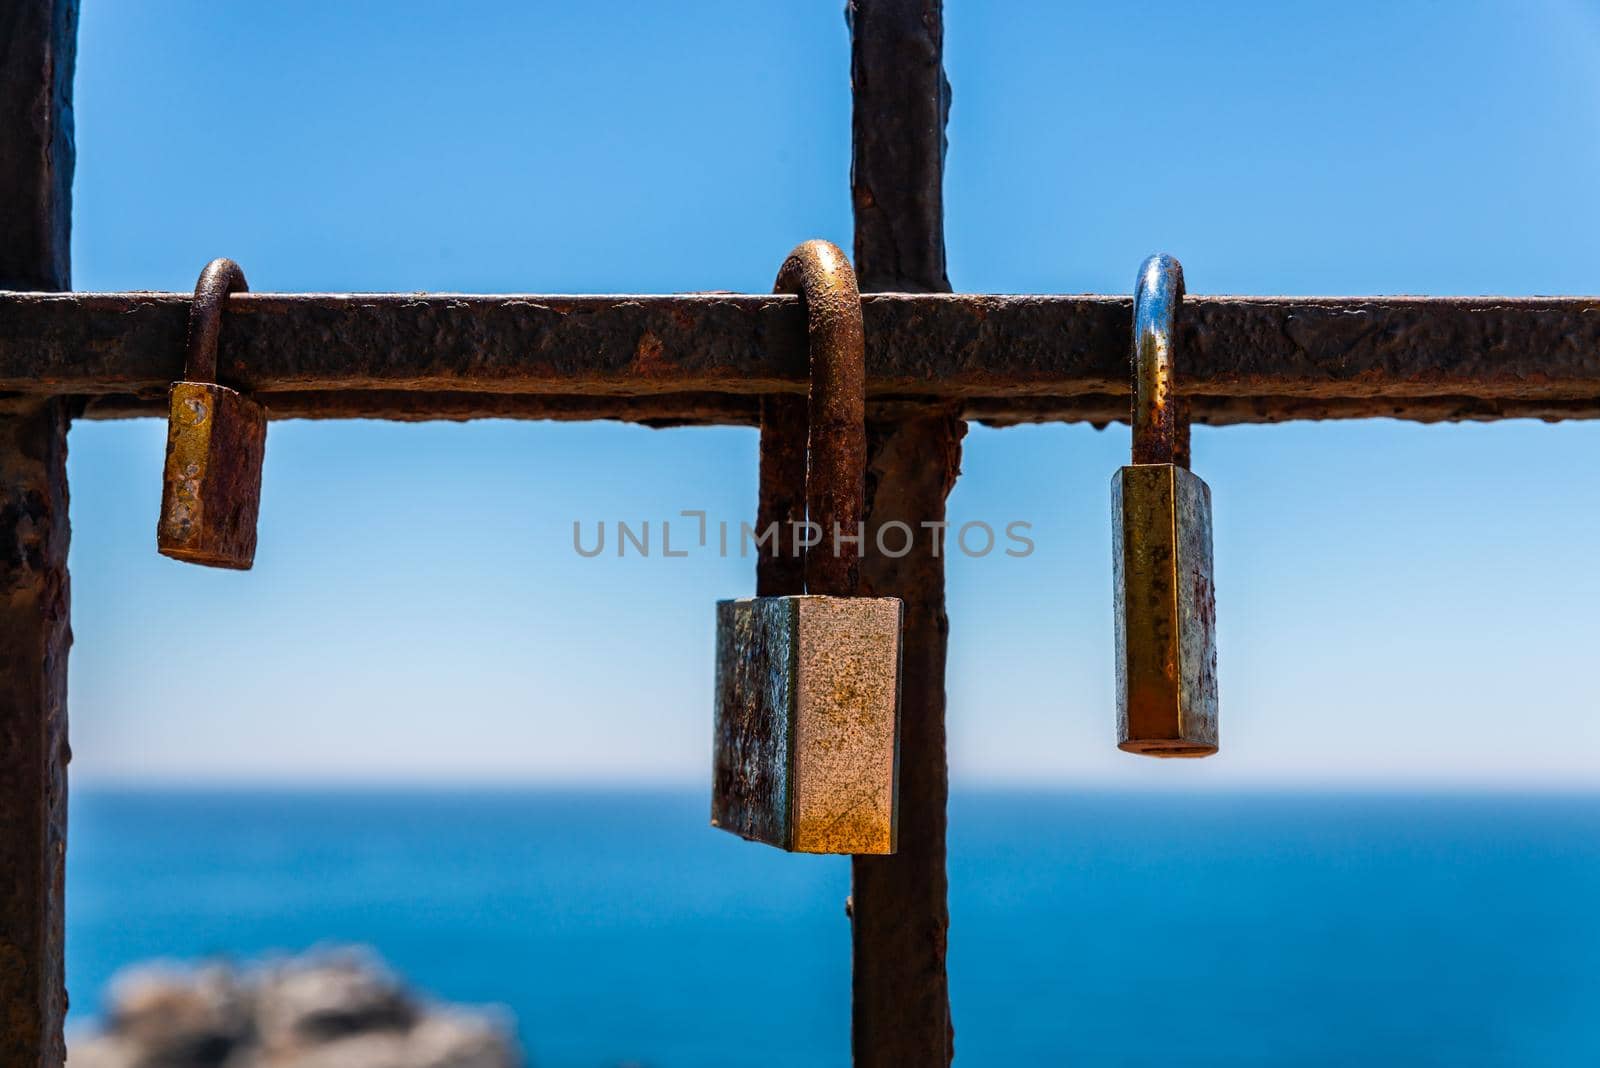 rusty padlock attached to a balustrade by the sea, a traditional way of showing love, relationship